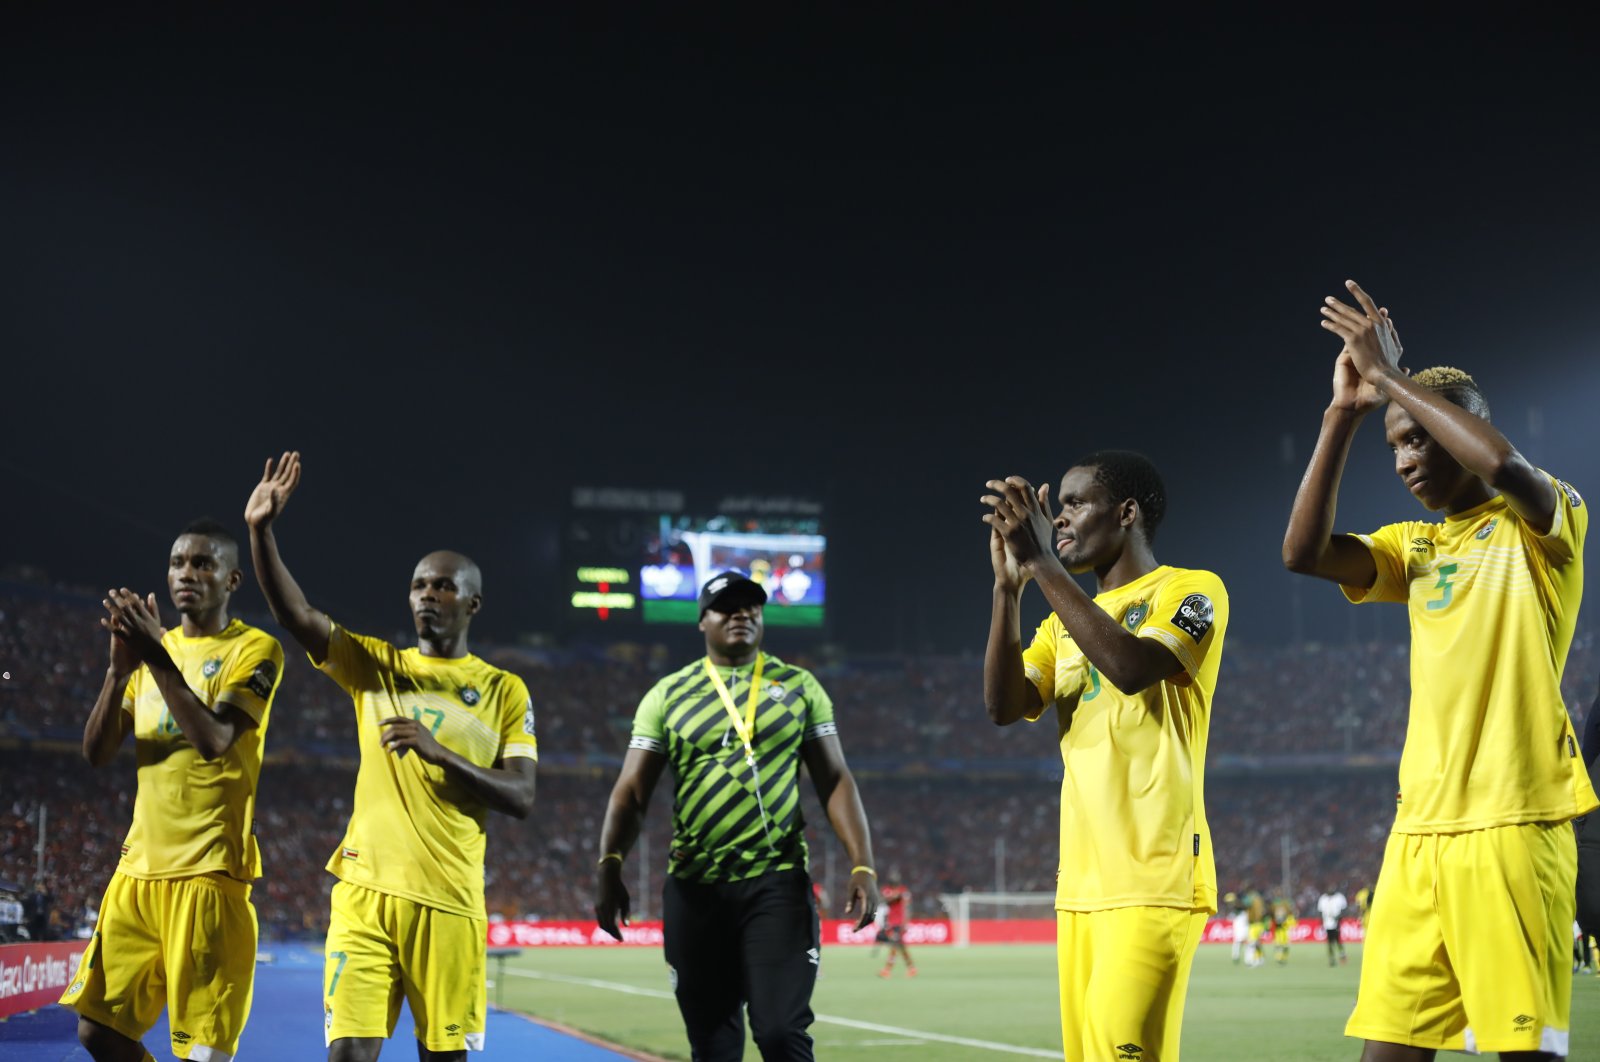 Zimbabwe national team players applaud their fans after the group A football match against Uganda at the Africa Cup of Nations at Cairo International Stadium in Cairo, Egypt, June 26, 2019. (AP Photo)